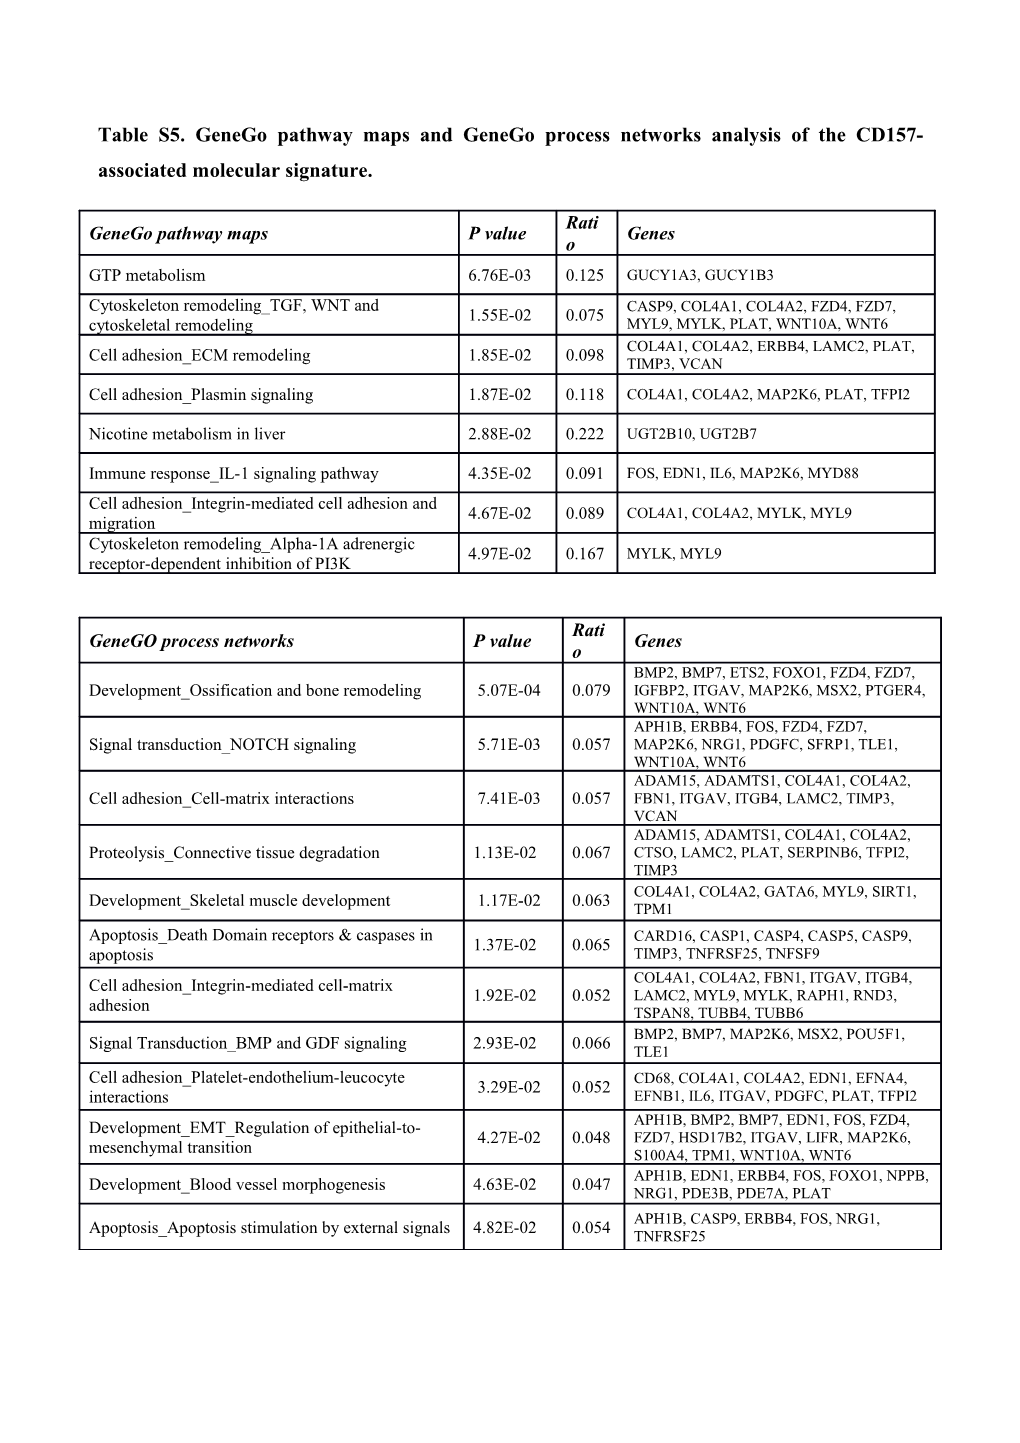 Table S5.Genego Pathway Maps and Genego Process Networks Analysis of the CD157-Associated